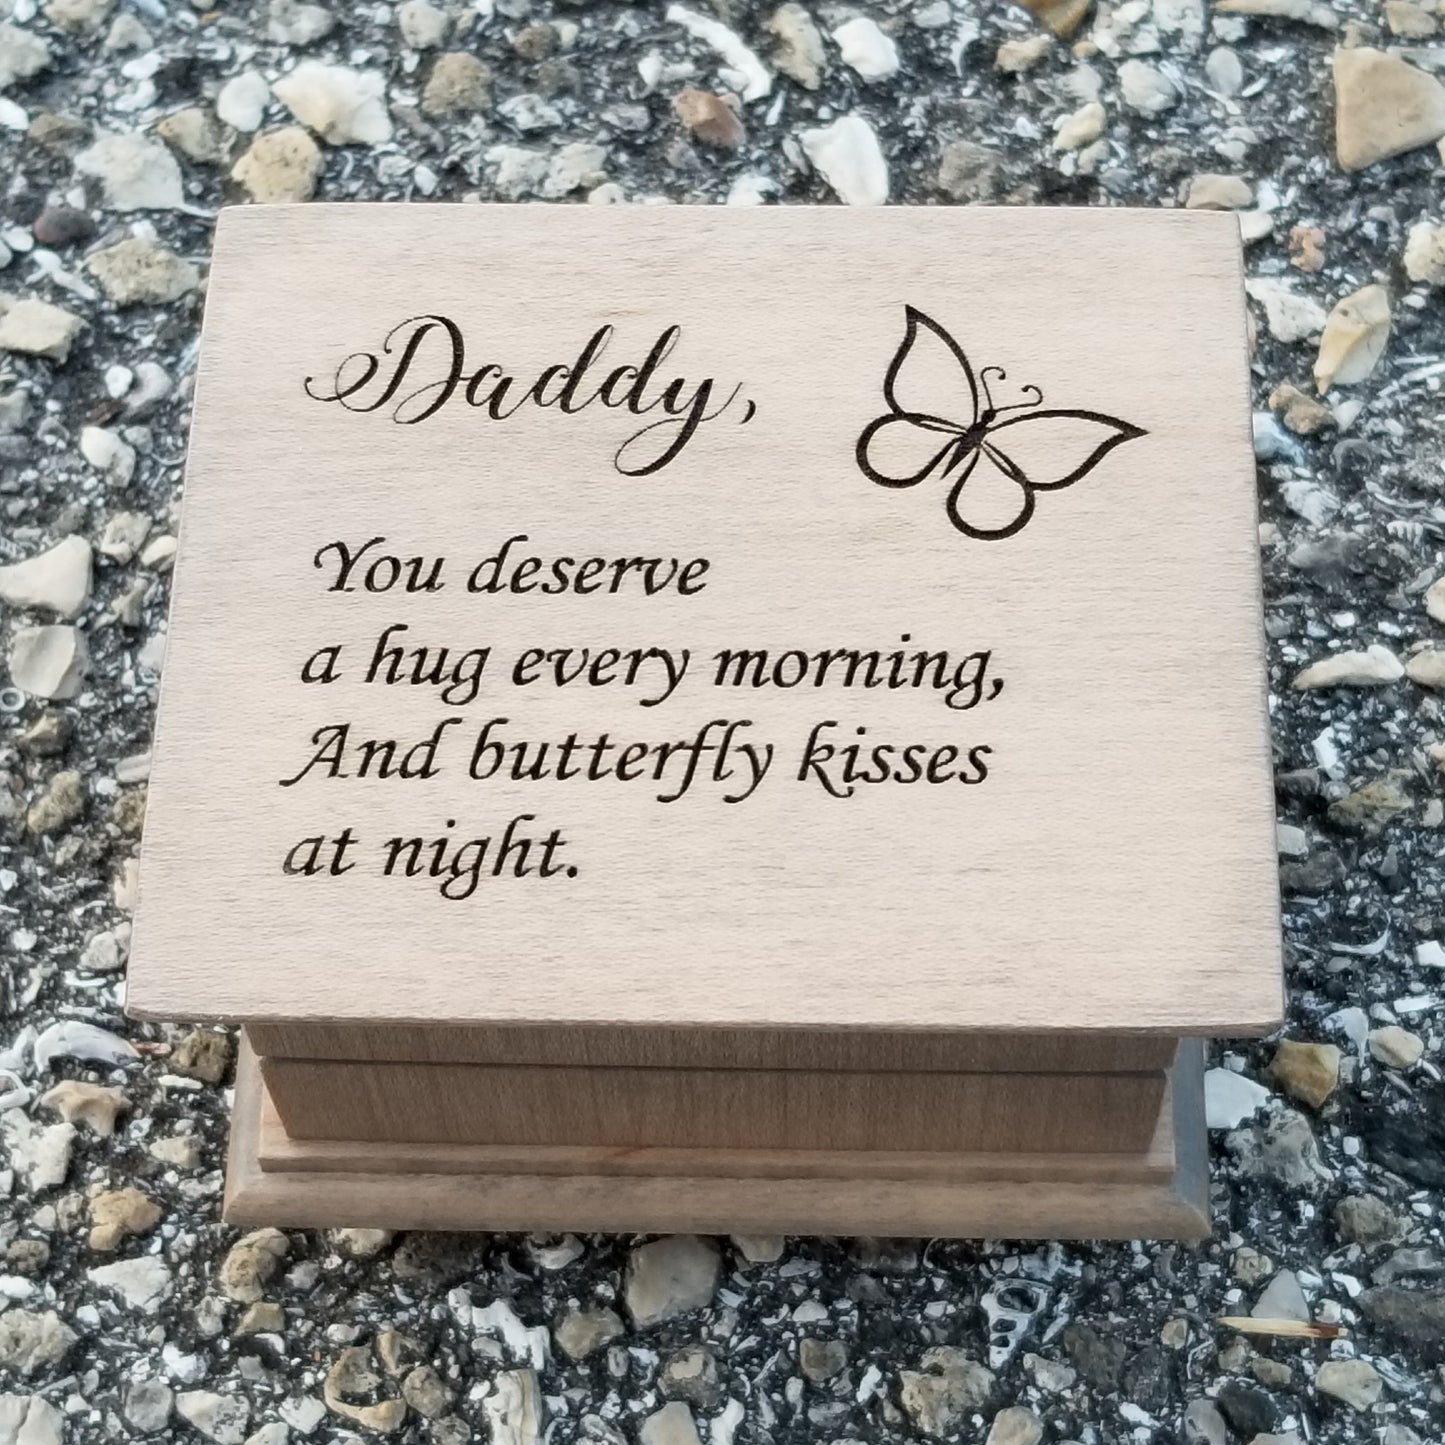 Music box Daddy, You deserve a hug every morning and butterfly kisses at night along with a butterfly engraved on top, in gray color